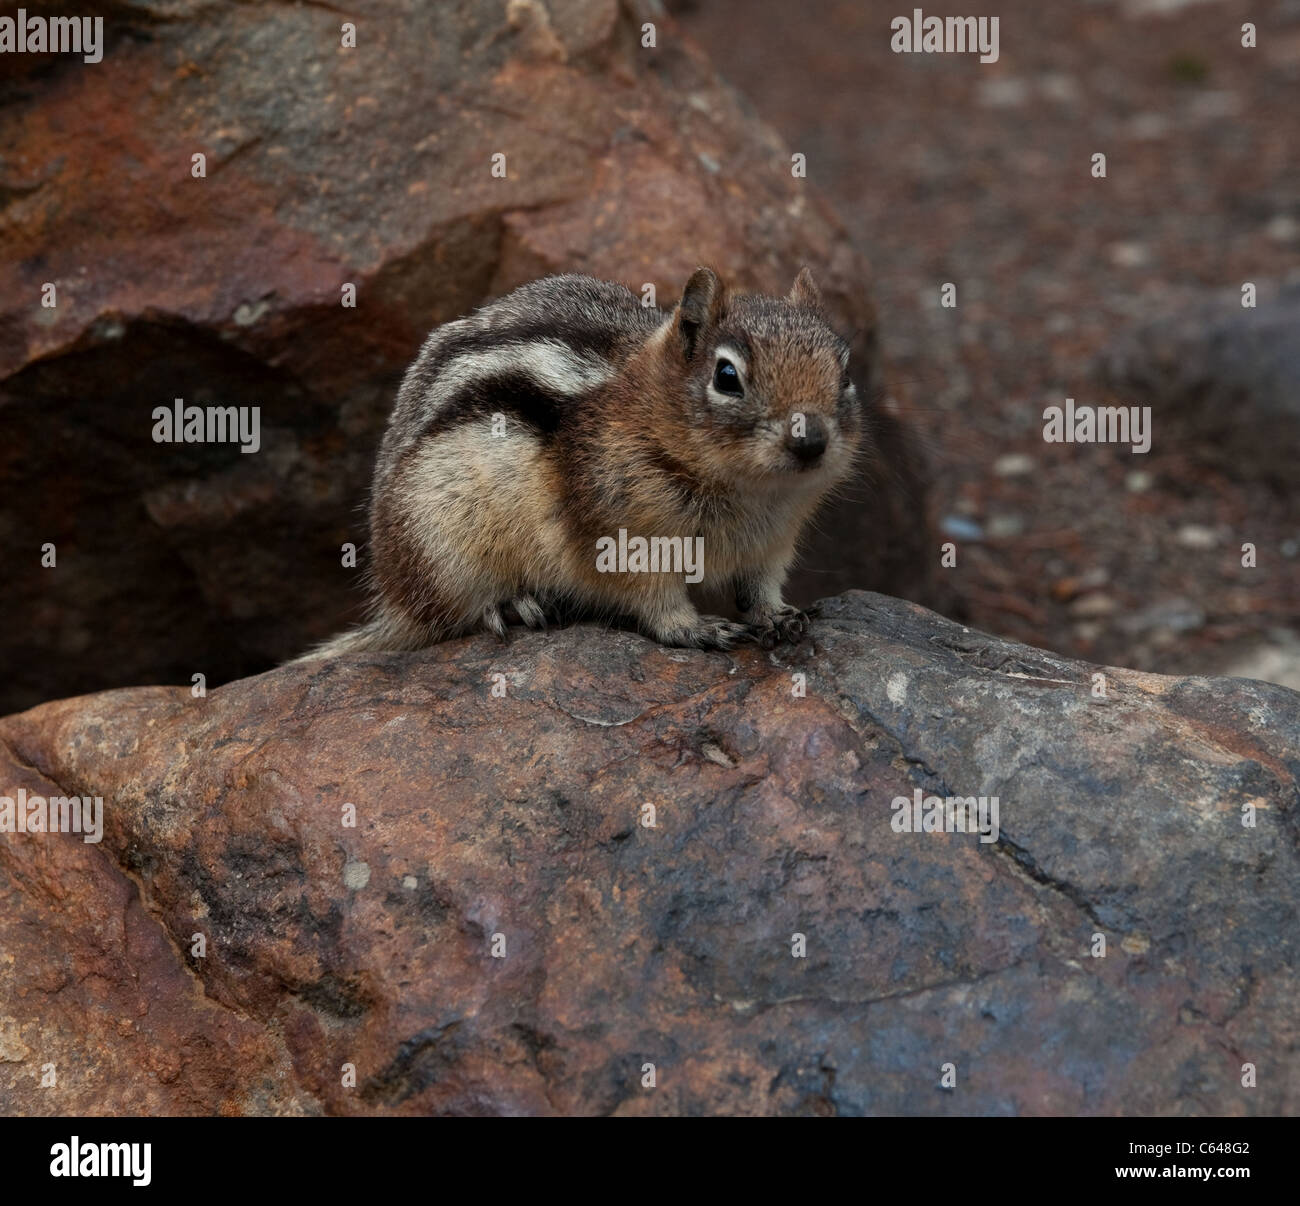 A small chipmunk sitting on a rock. Stock Photo